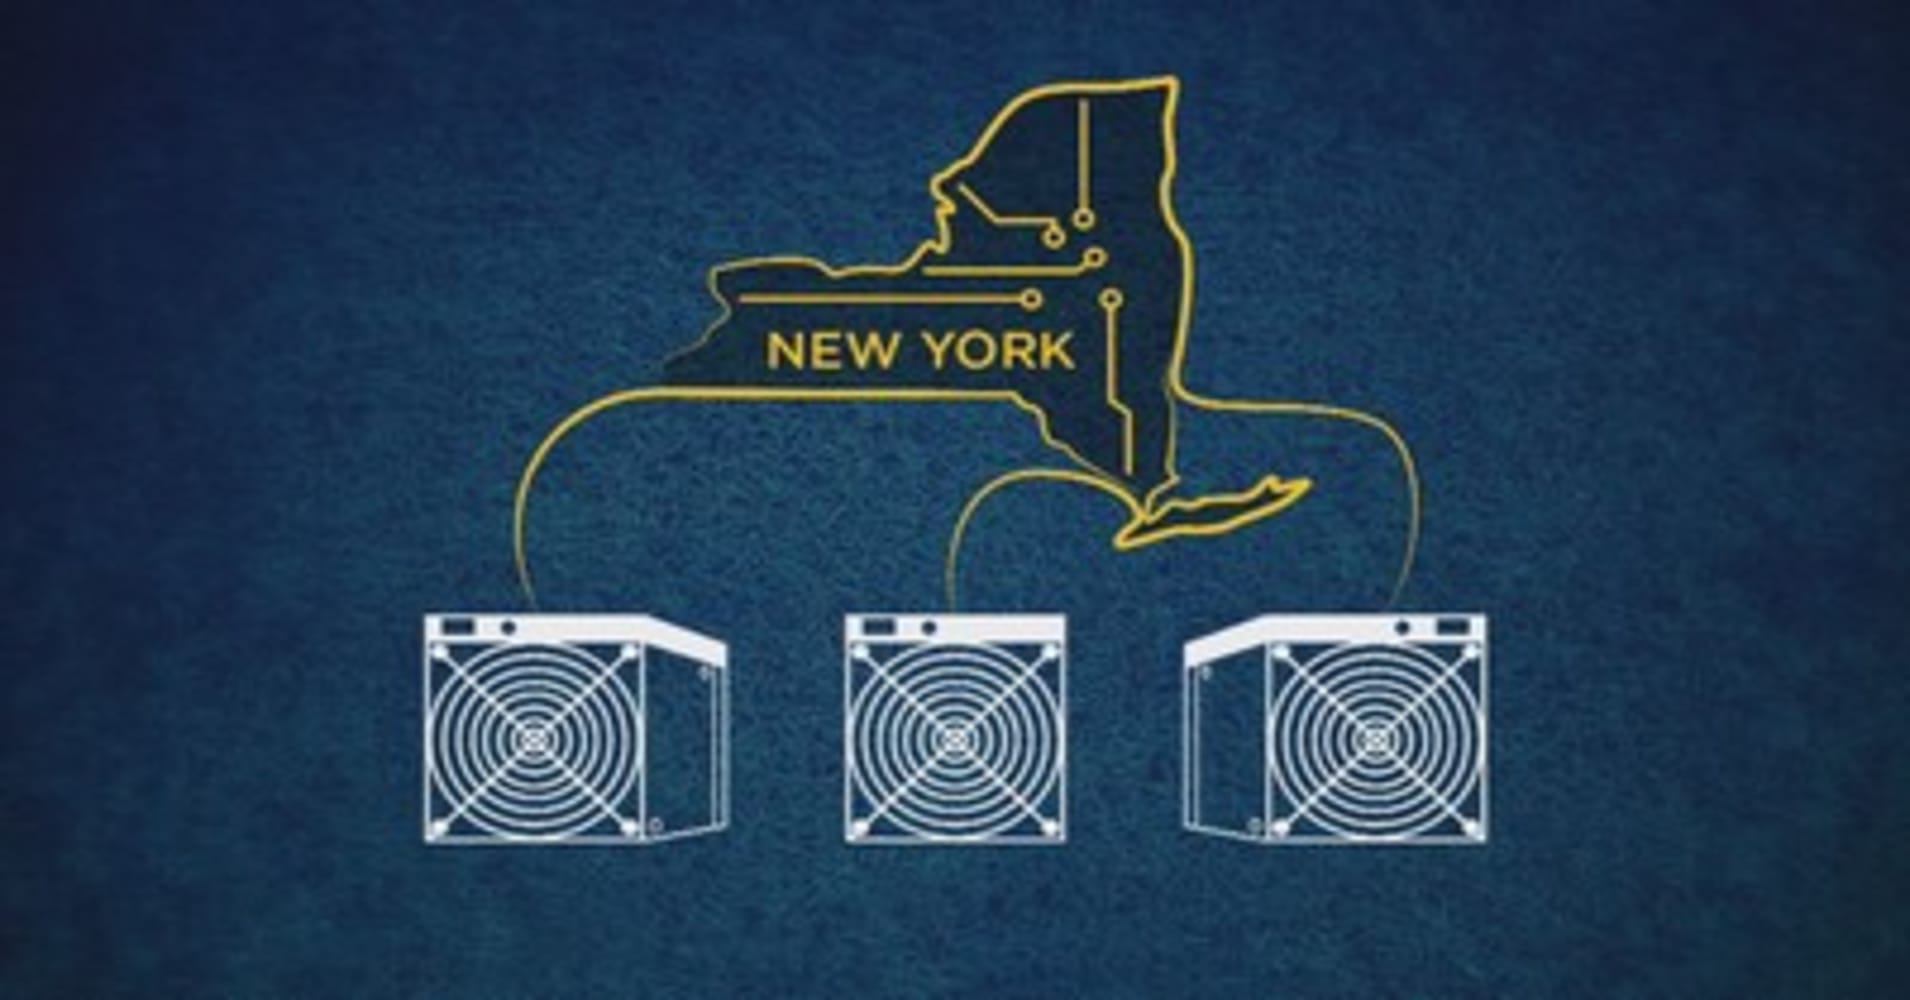 How To Buy Bitcoin In New York State